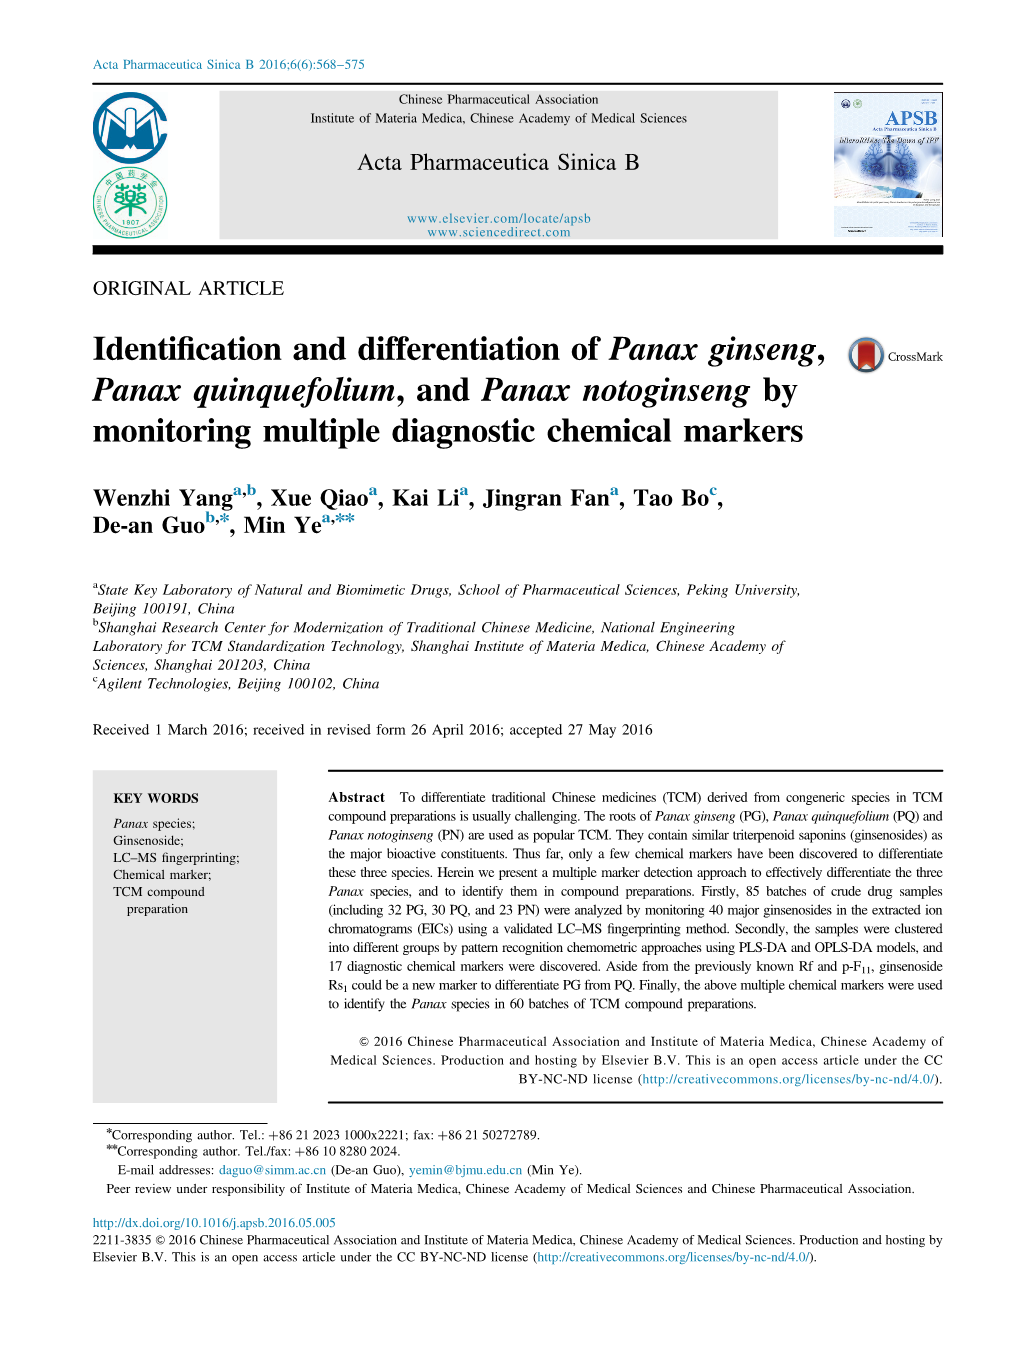 Identification and Differentiation of Panax Ginseng, Panax